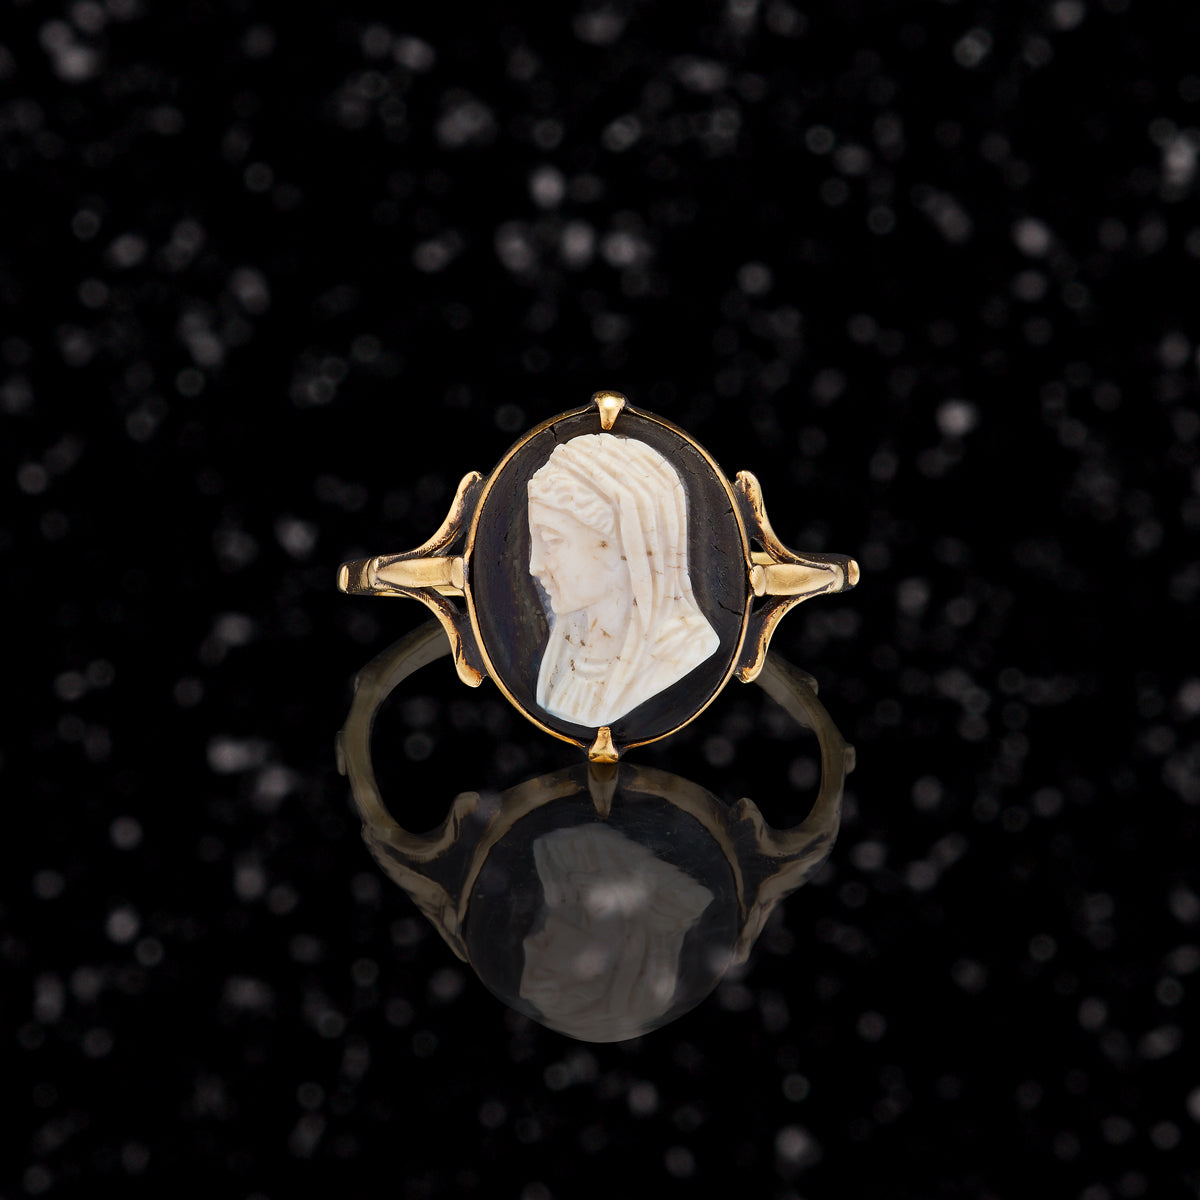 THE MOTHER MARY DEVOTIONAL CAMEO